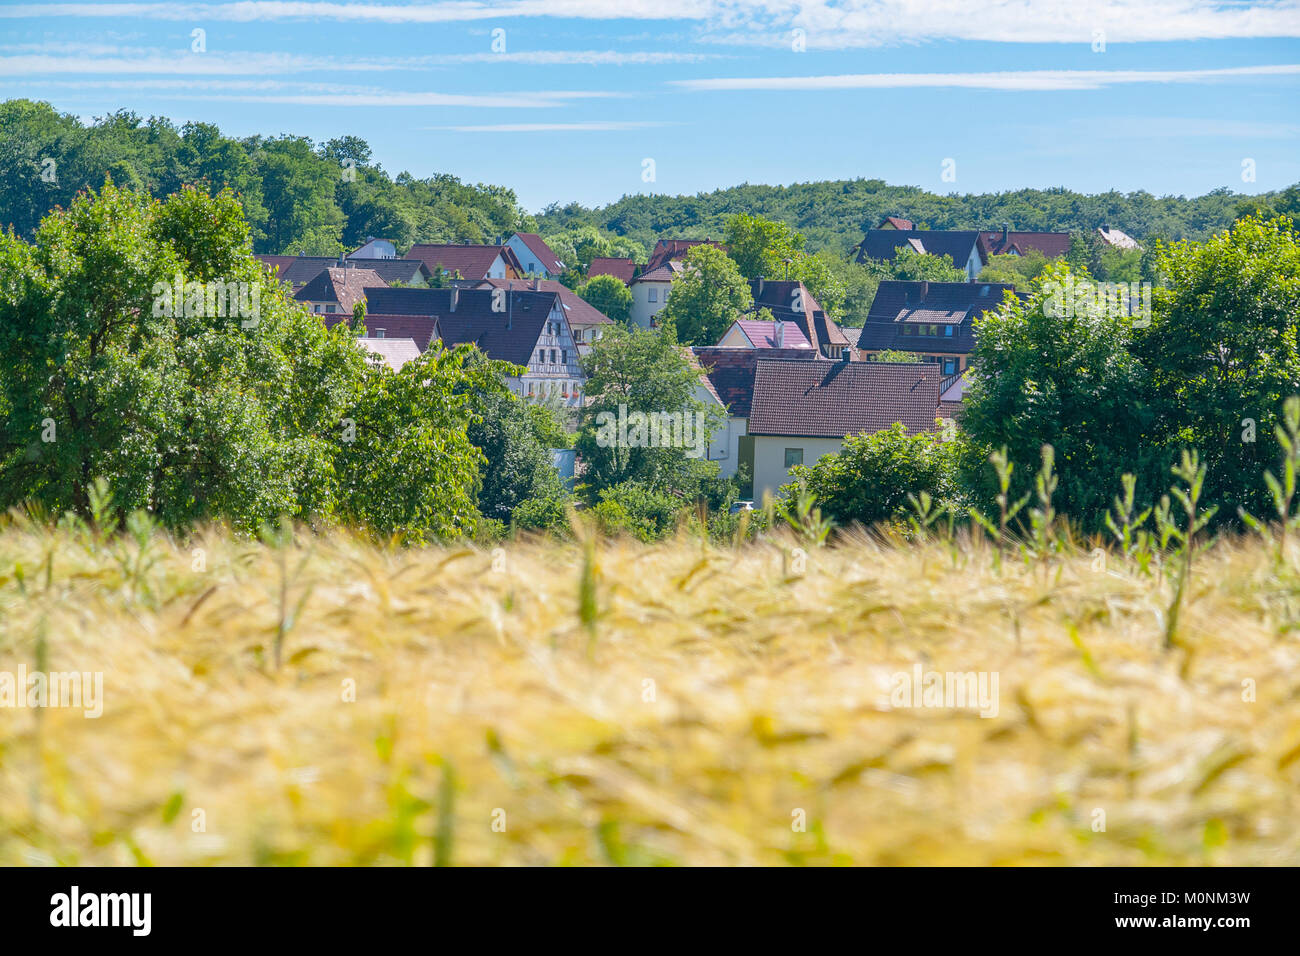 idyllic rural village named Schleierhof located in the Hohenlohe district in Southern Germany at summer time Stock Photo